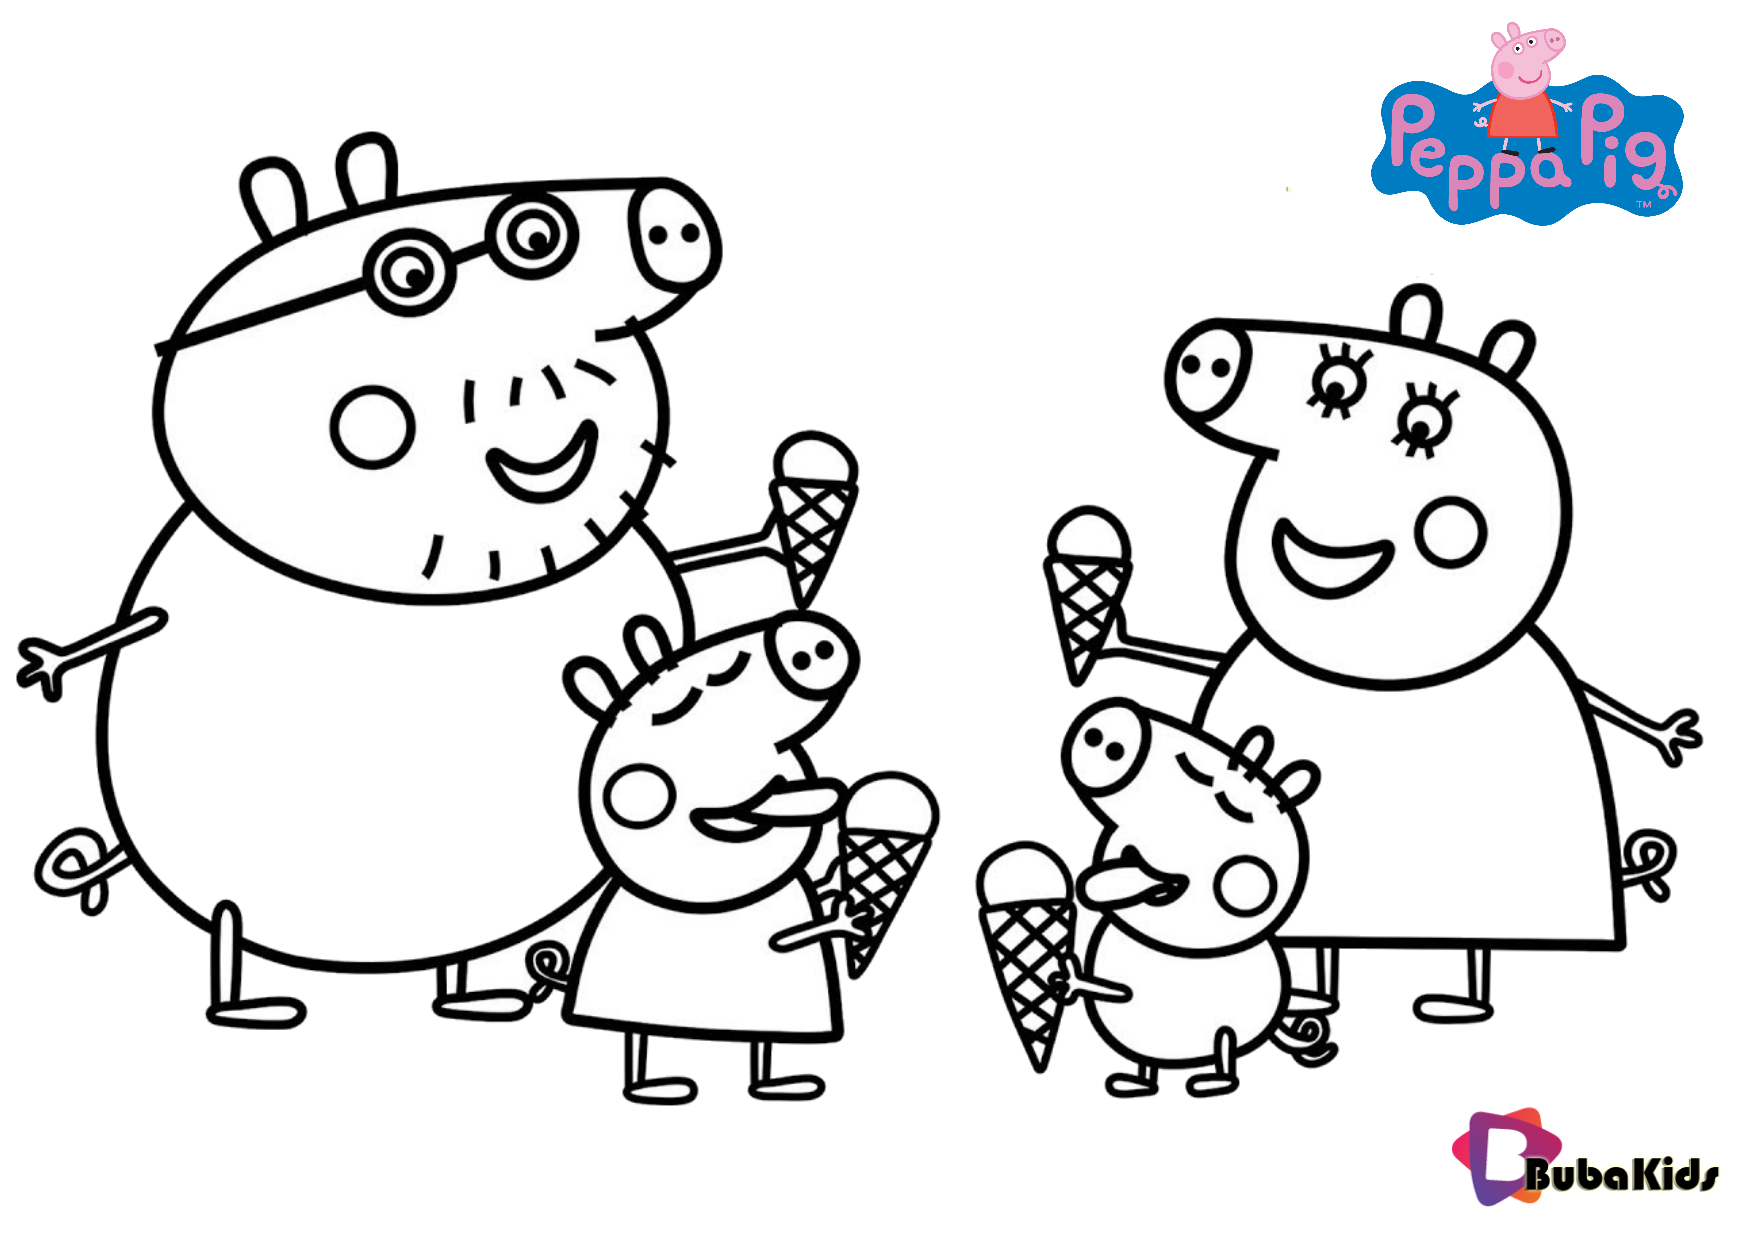 835 Simple Ice Cream Peppa Pig Coloring Pages with disney character